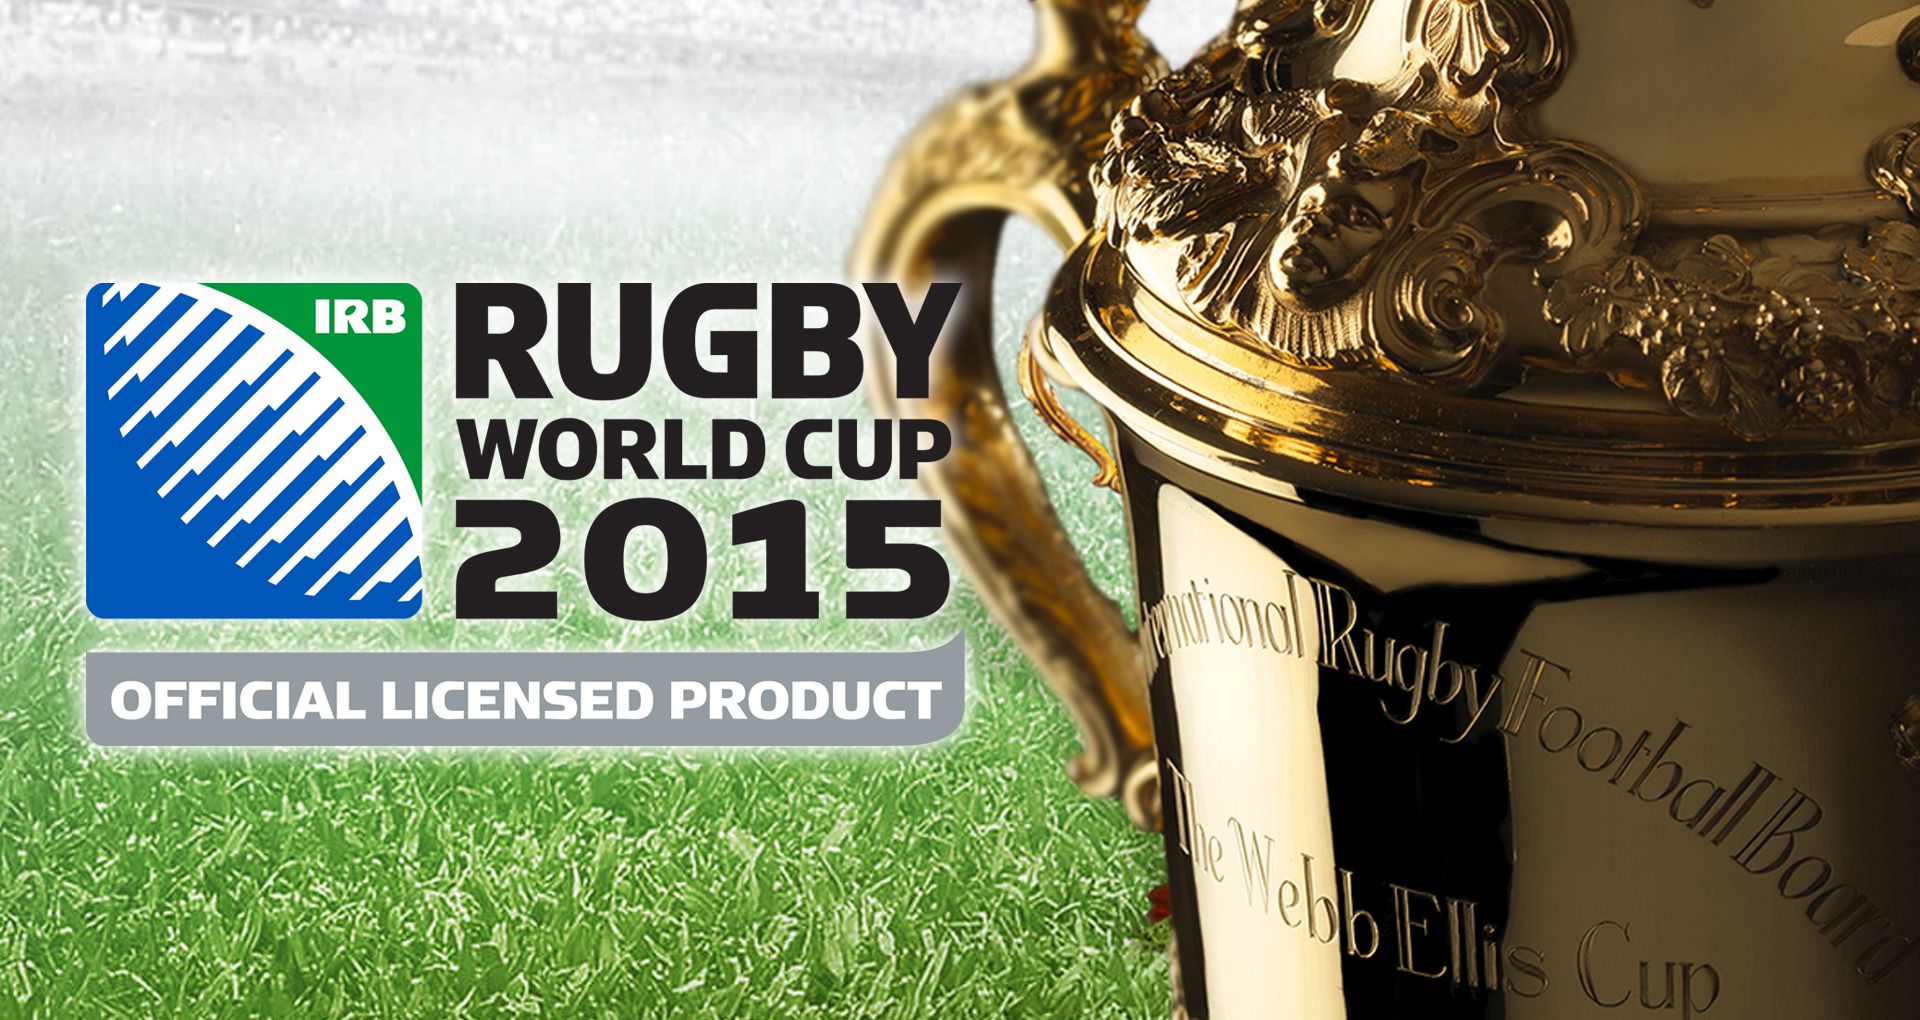 Rugby World Cup 2015. Cup 2015